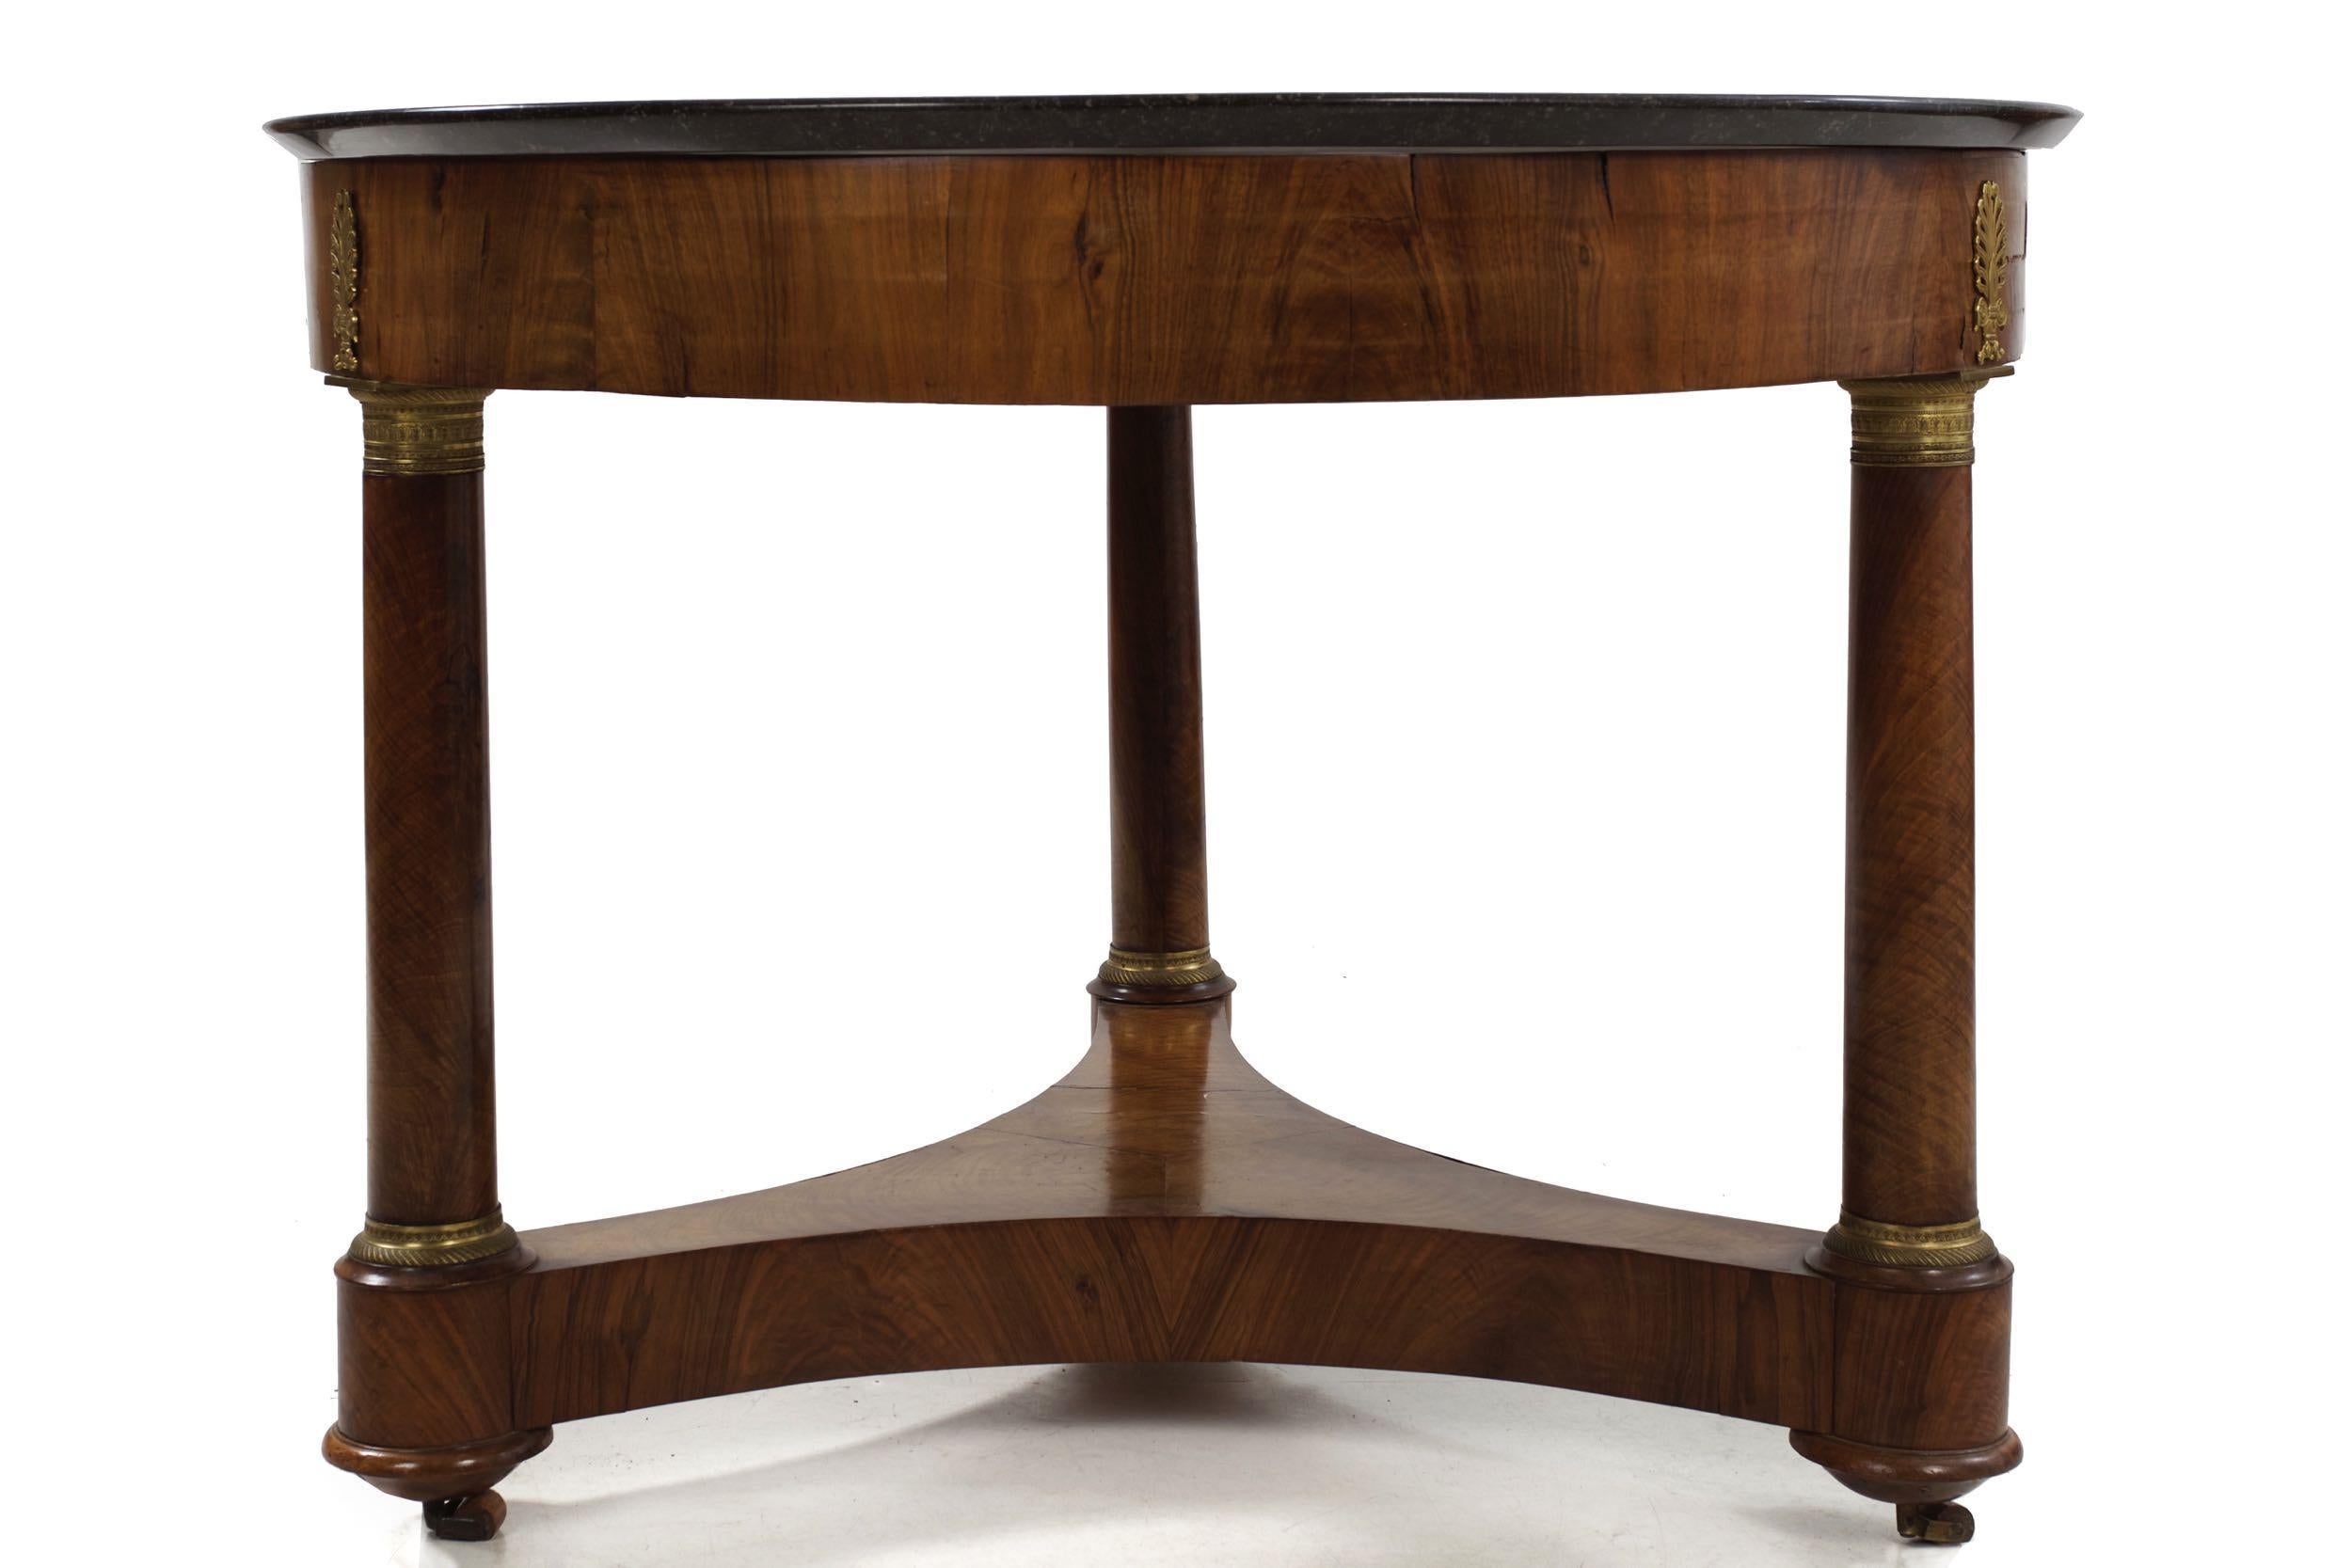 French Empire Antique Burl Walnut Center Table with Black Marble Top, circa 1815 For Sale 1